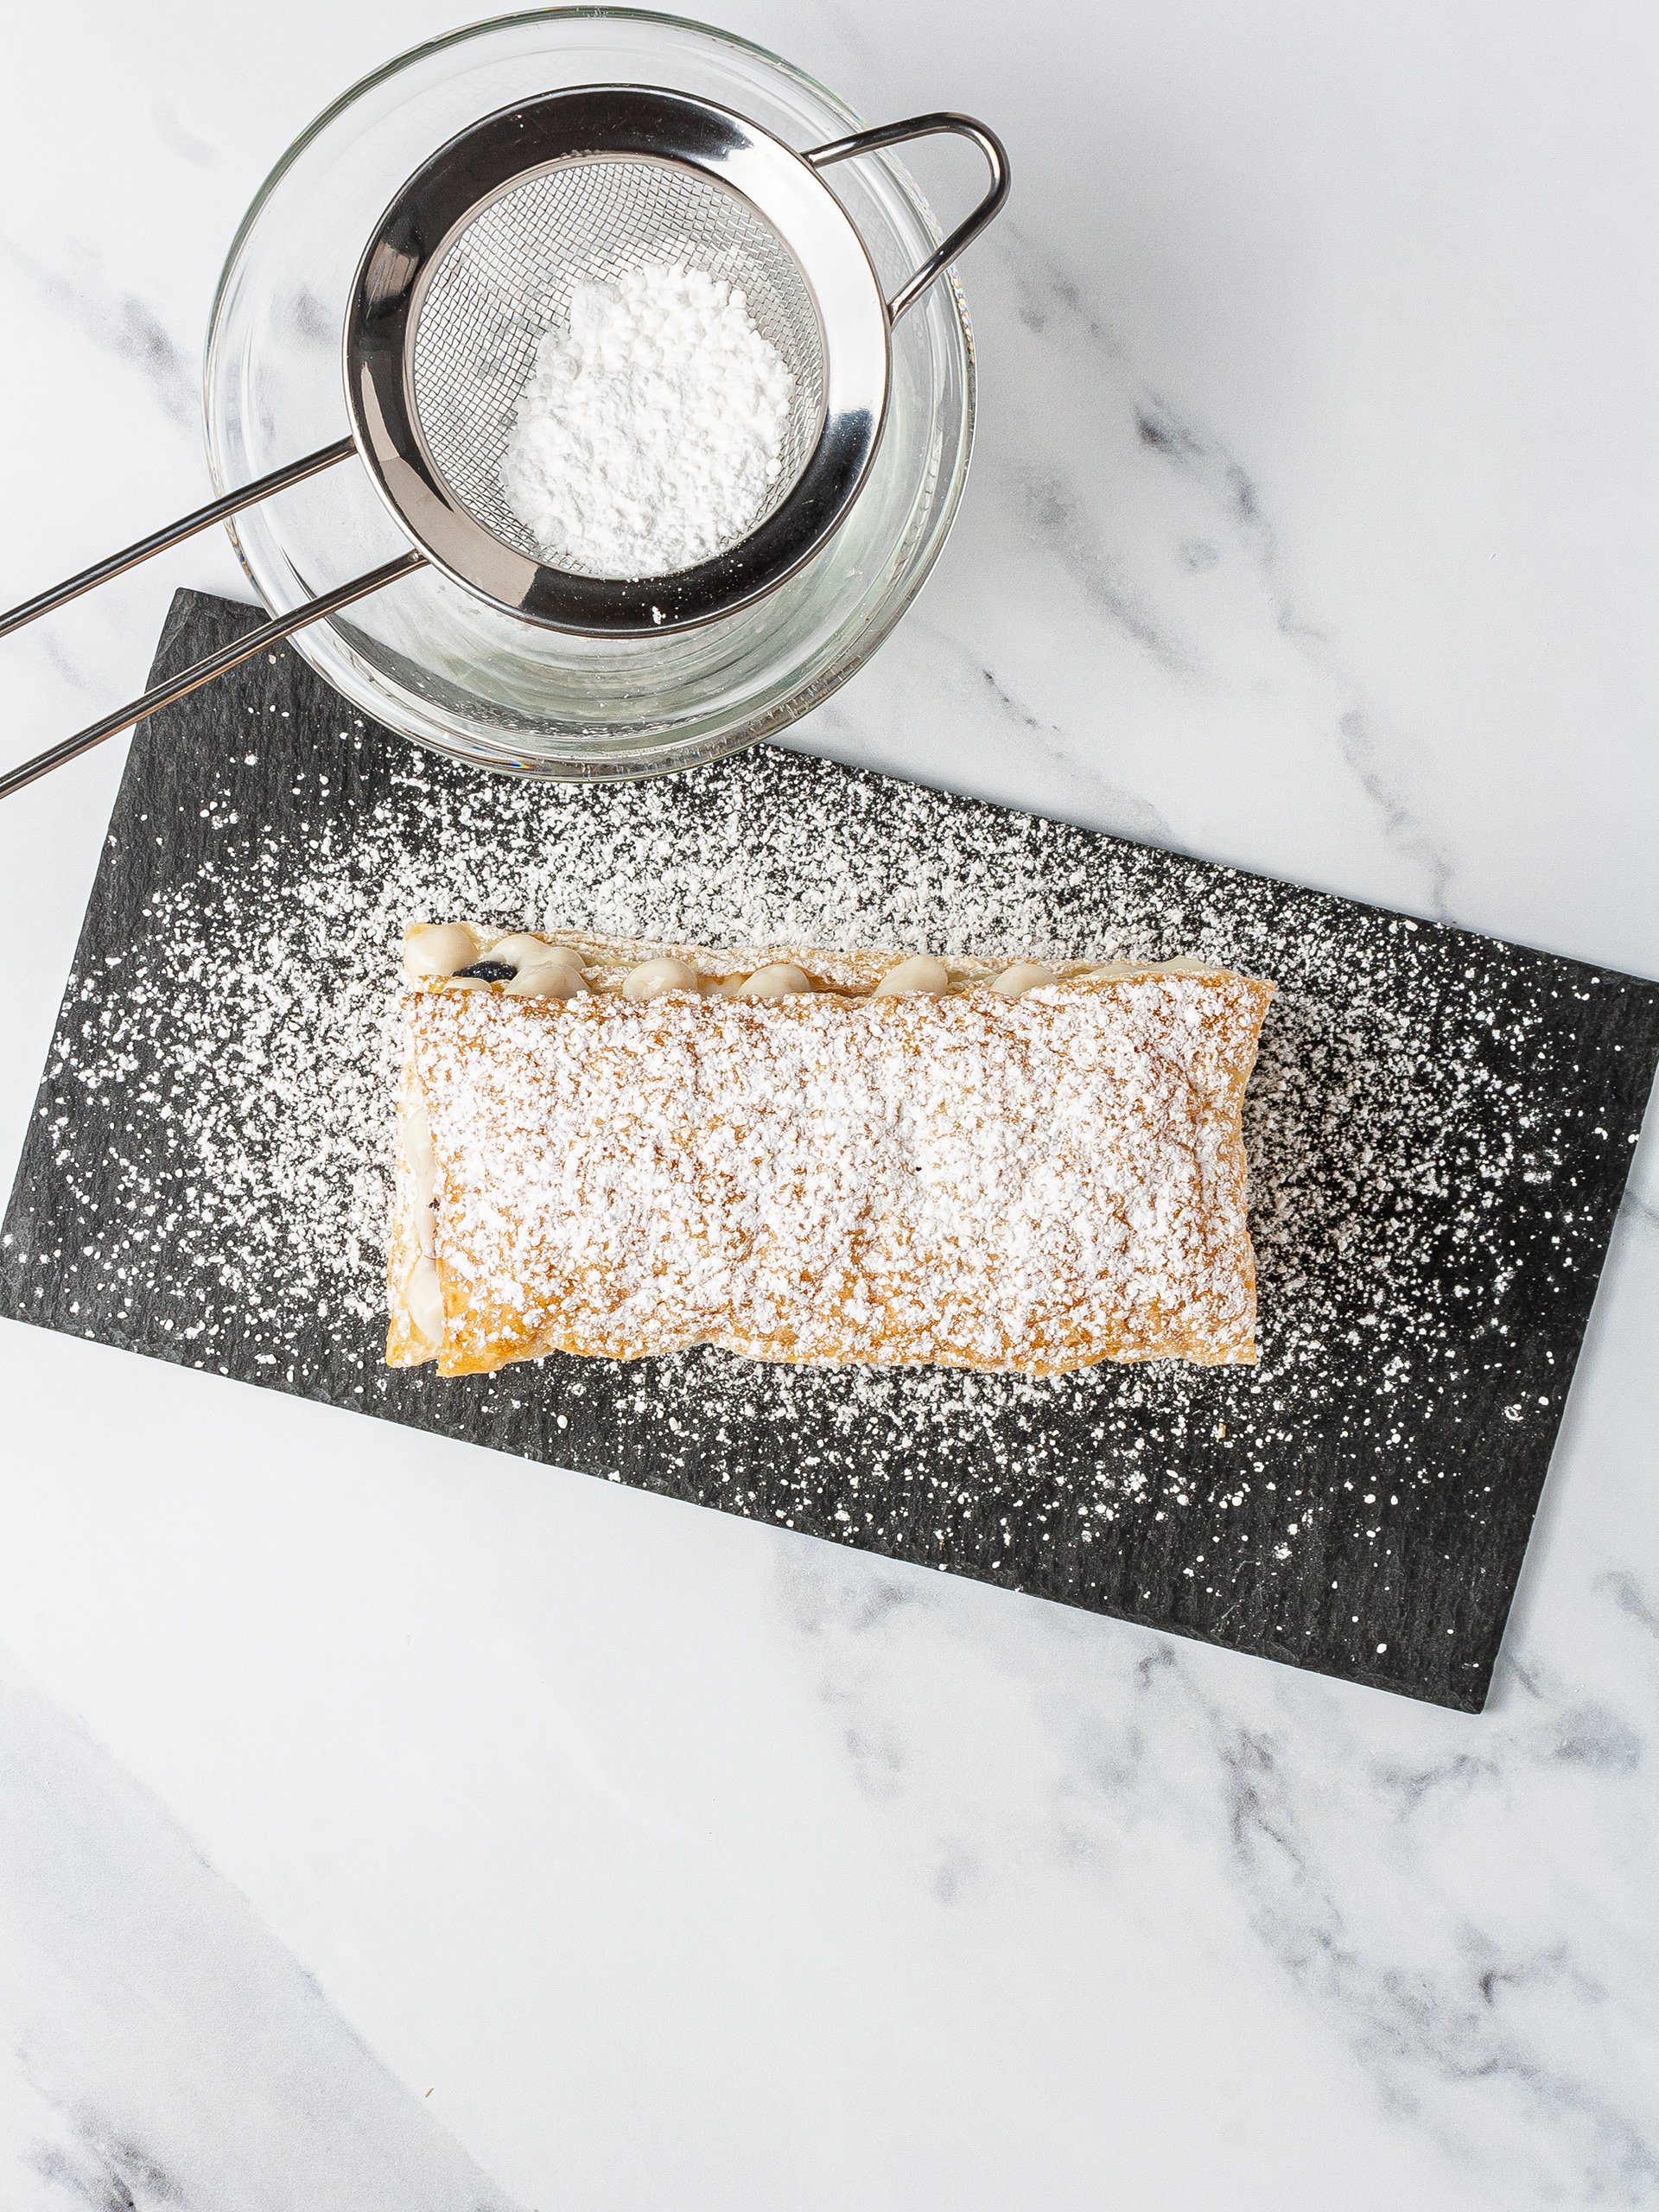 mille feuille pastry with dusted icing sugar